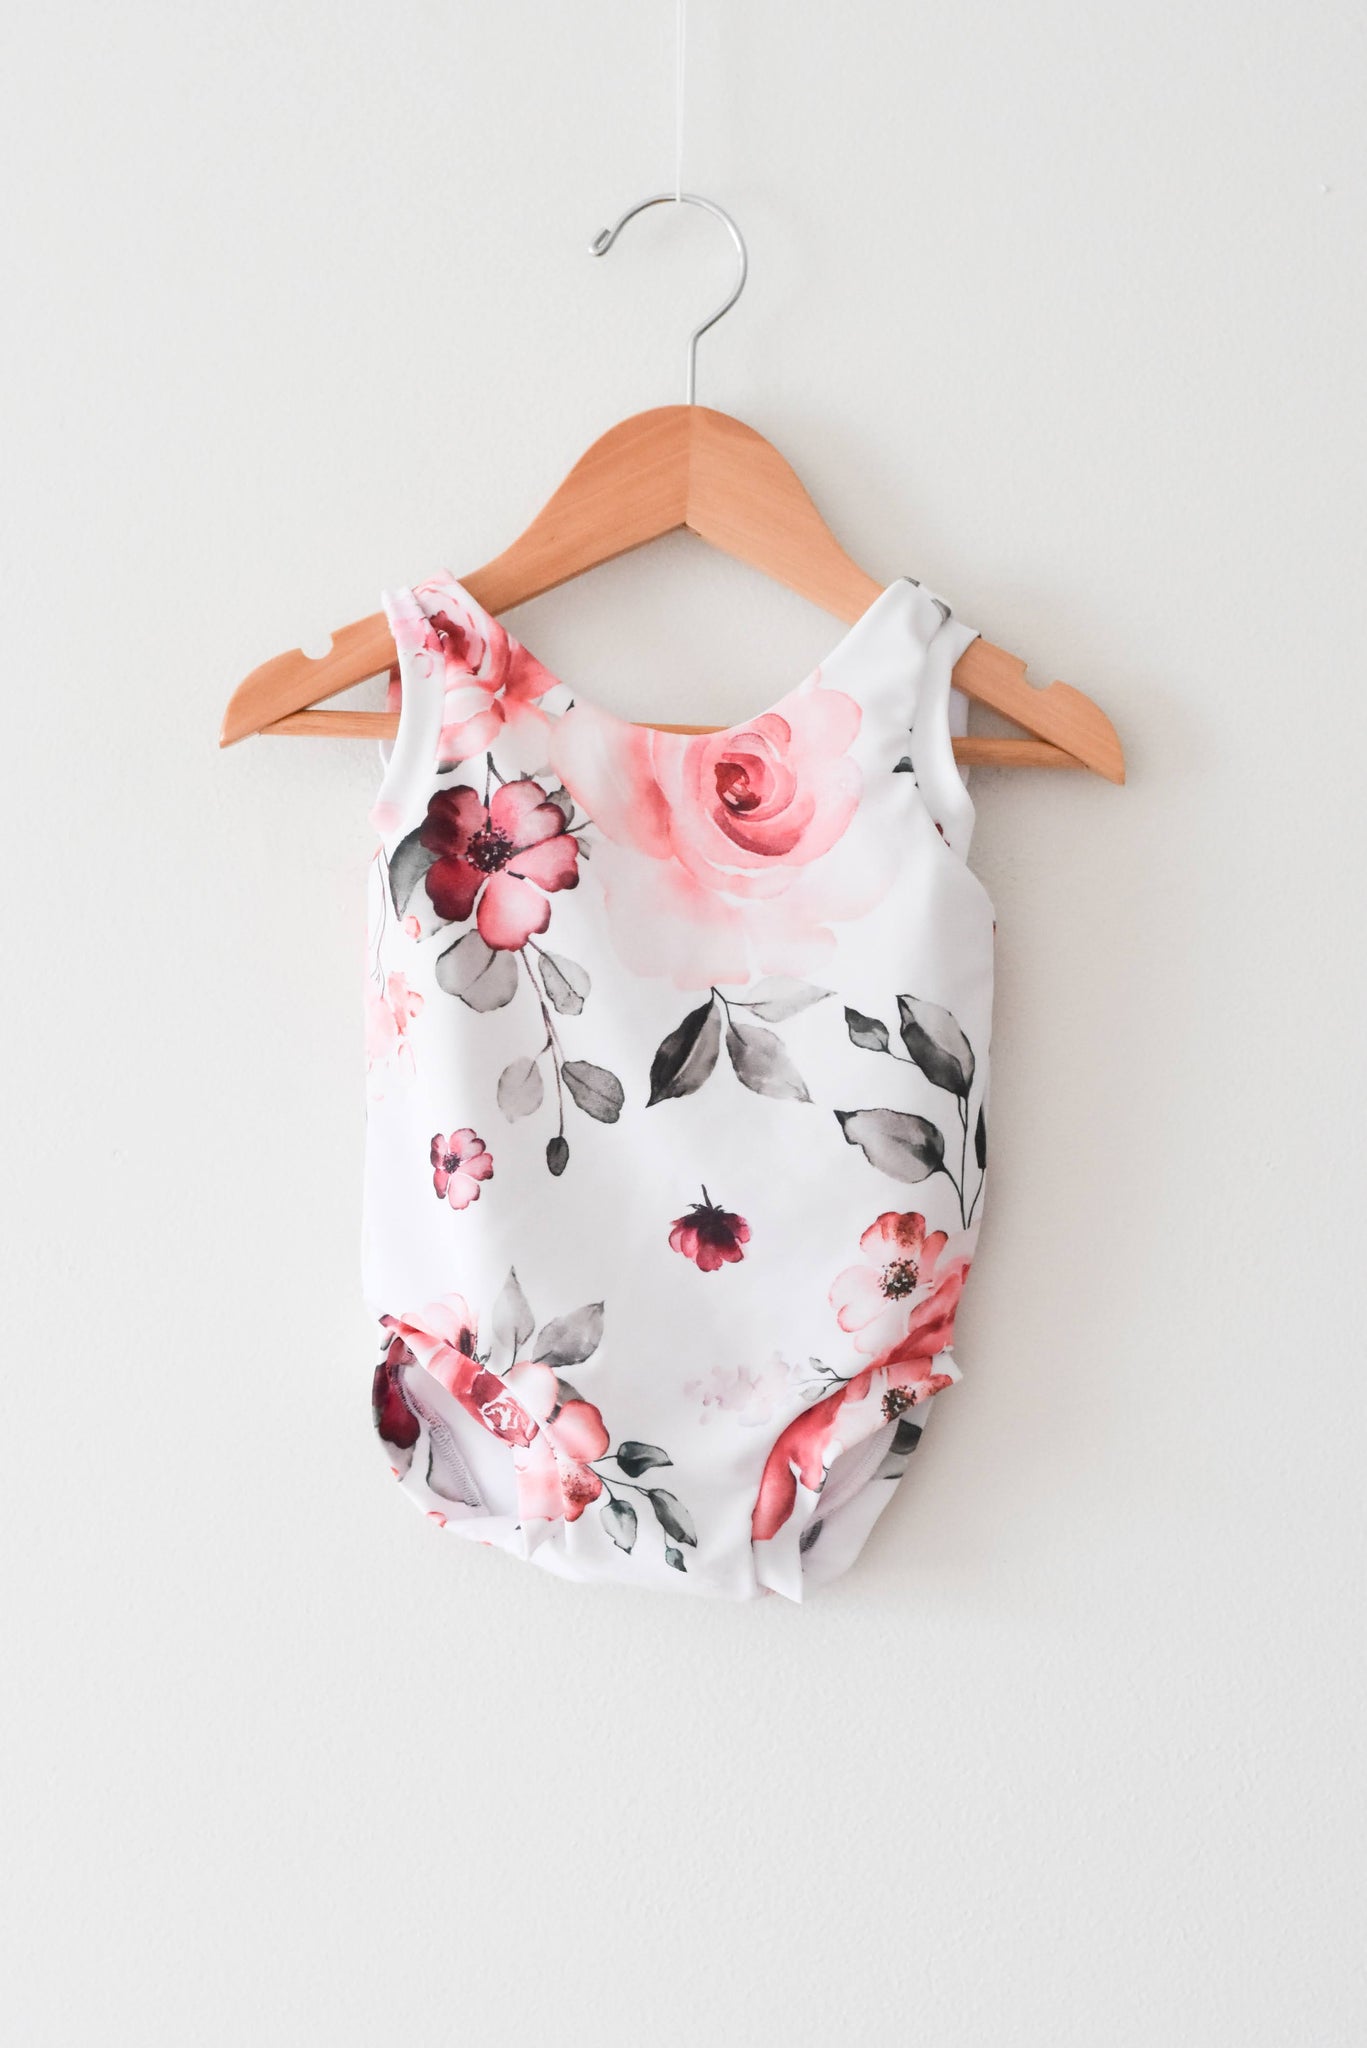 Blayke's Bows Swimsuit • 6-12 months